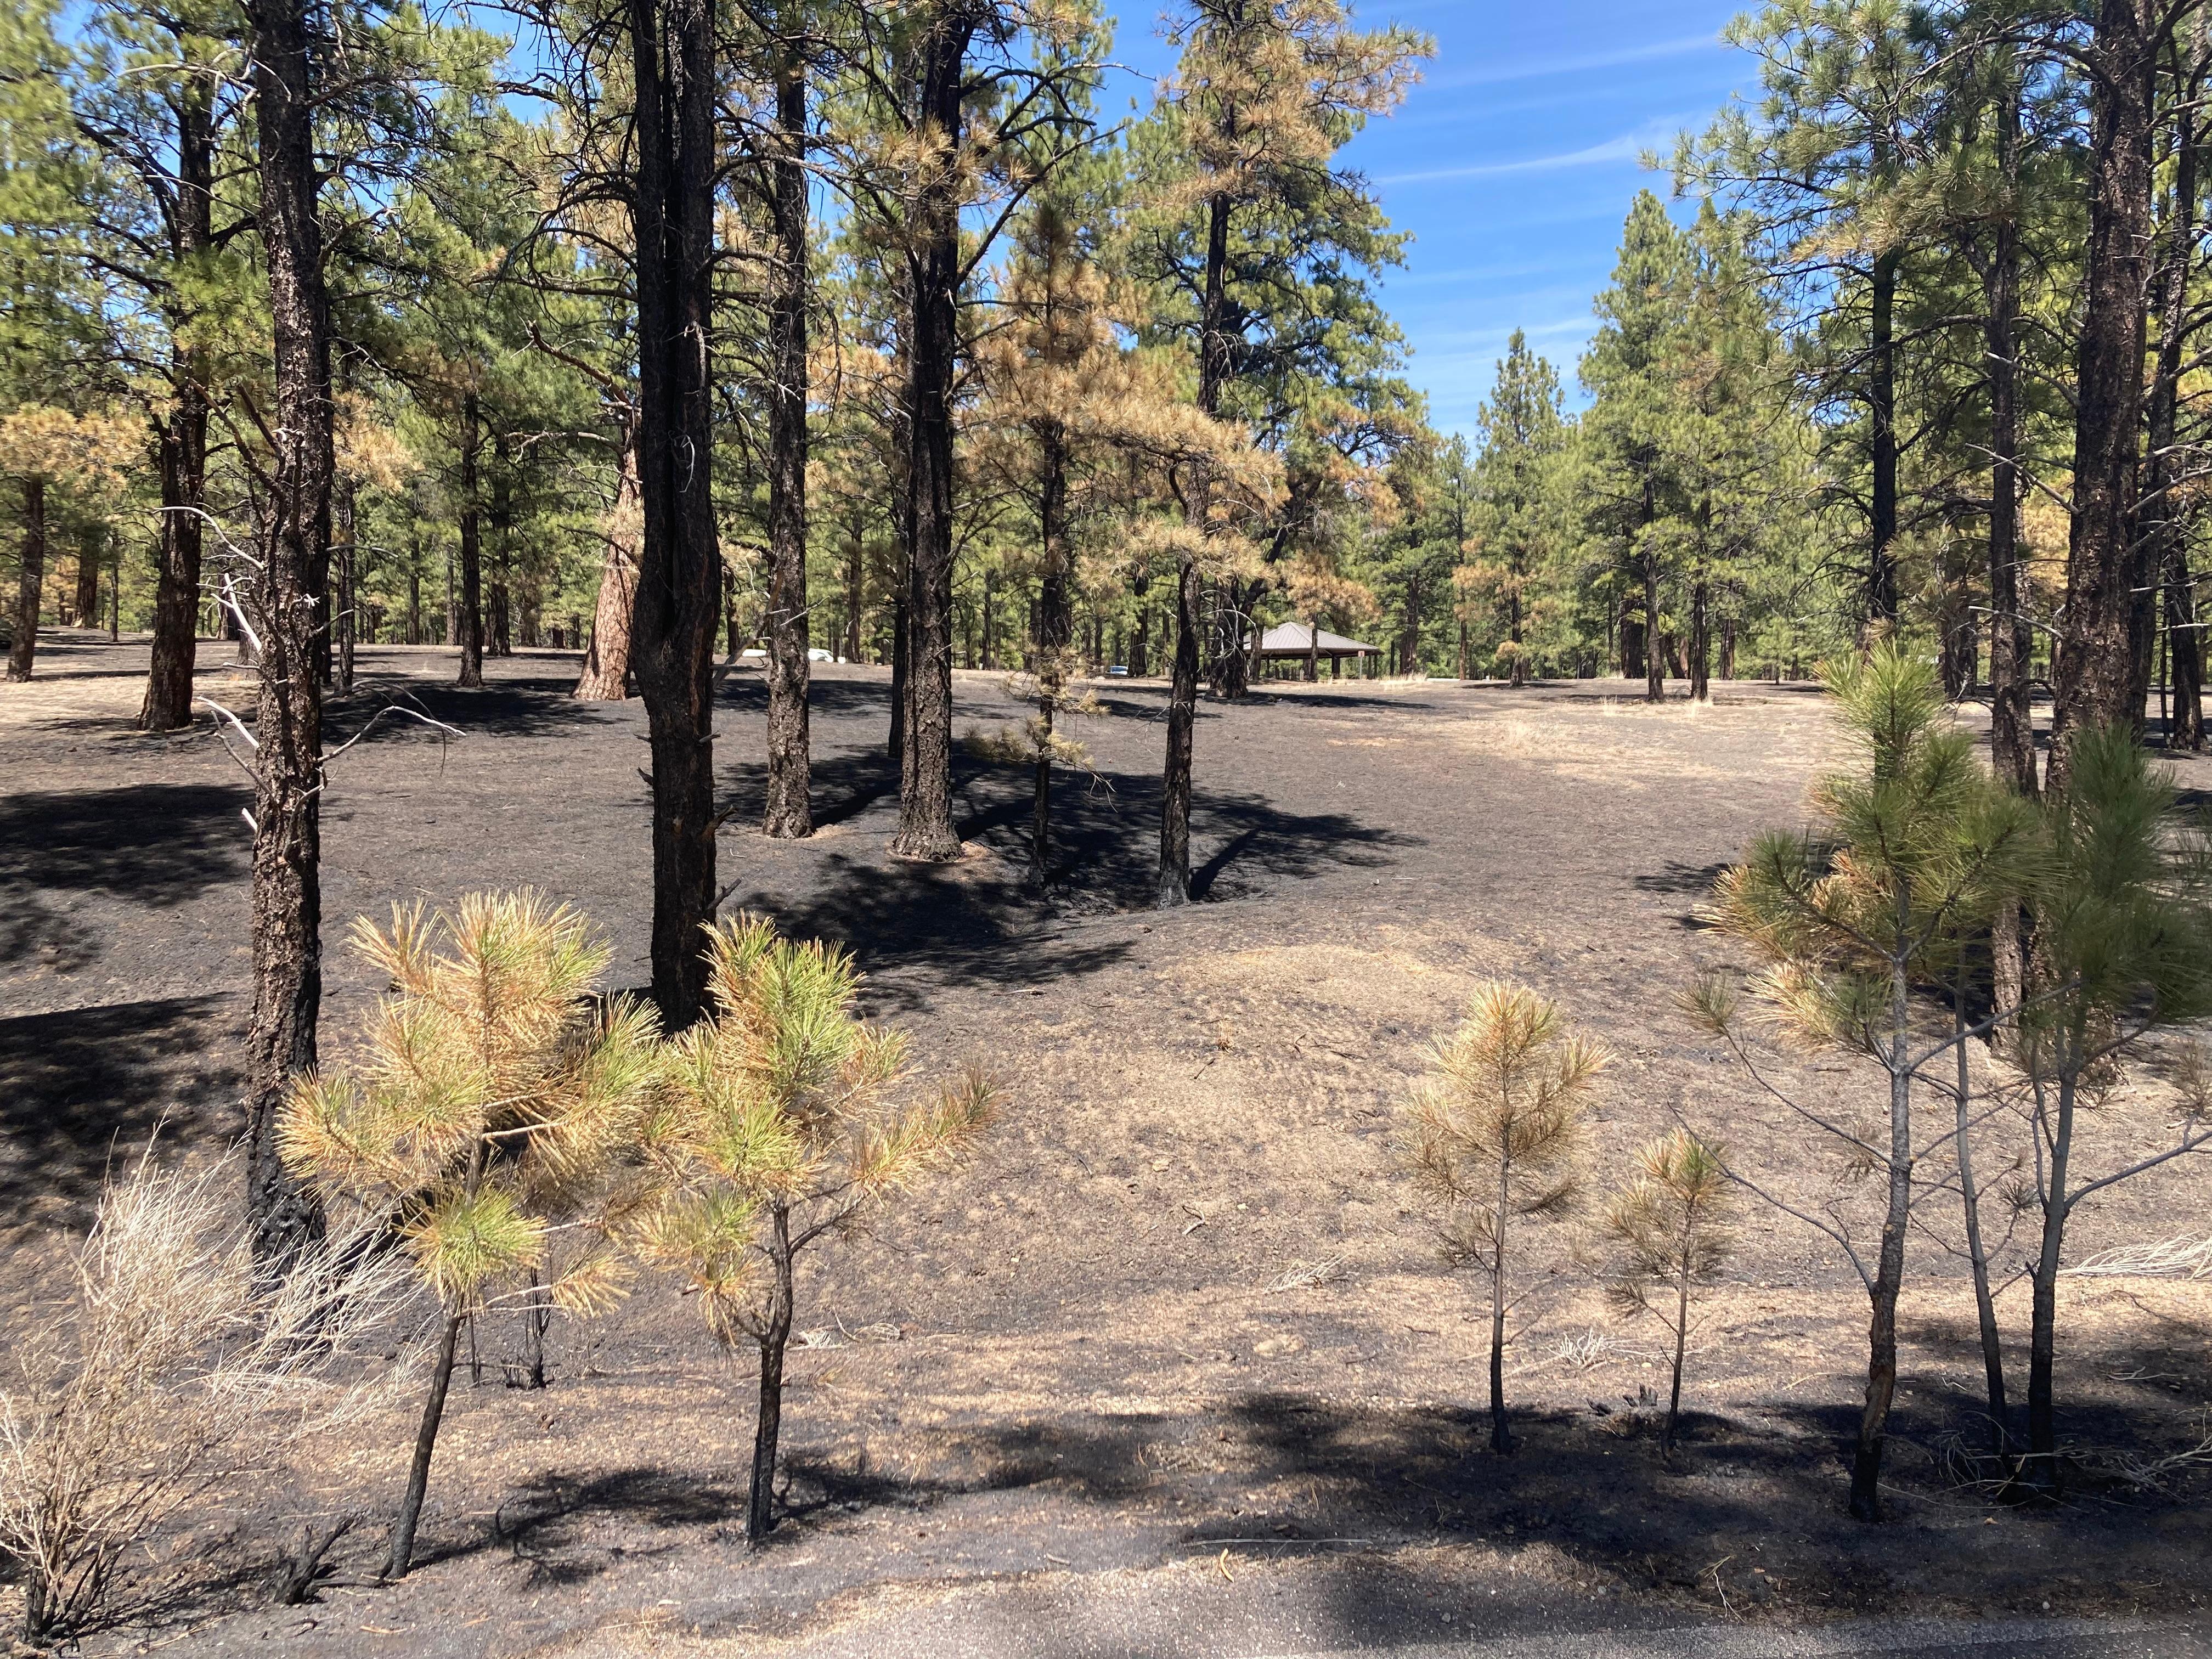 Low burn severity near Bonito Group Site Campground